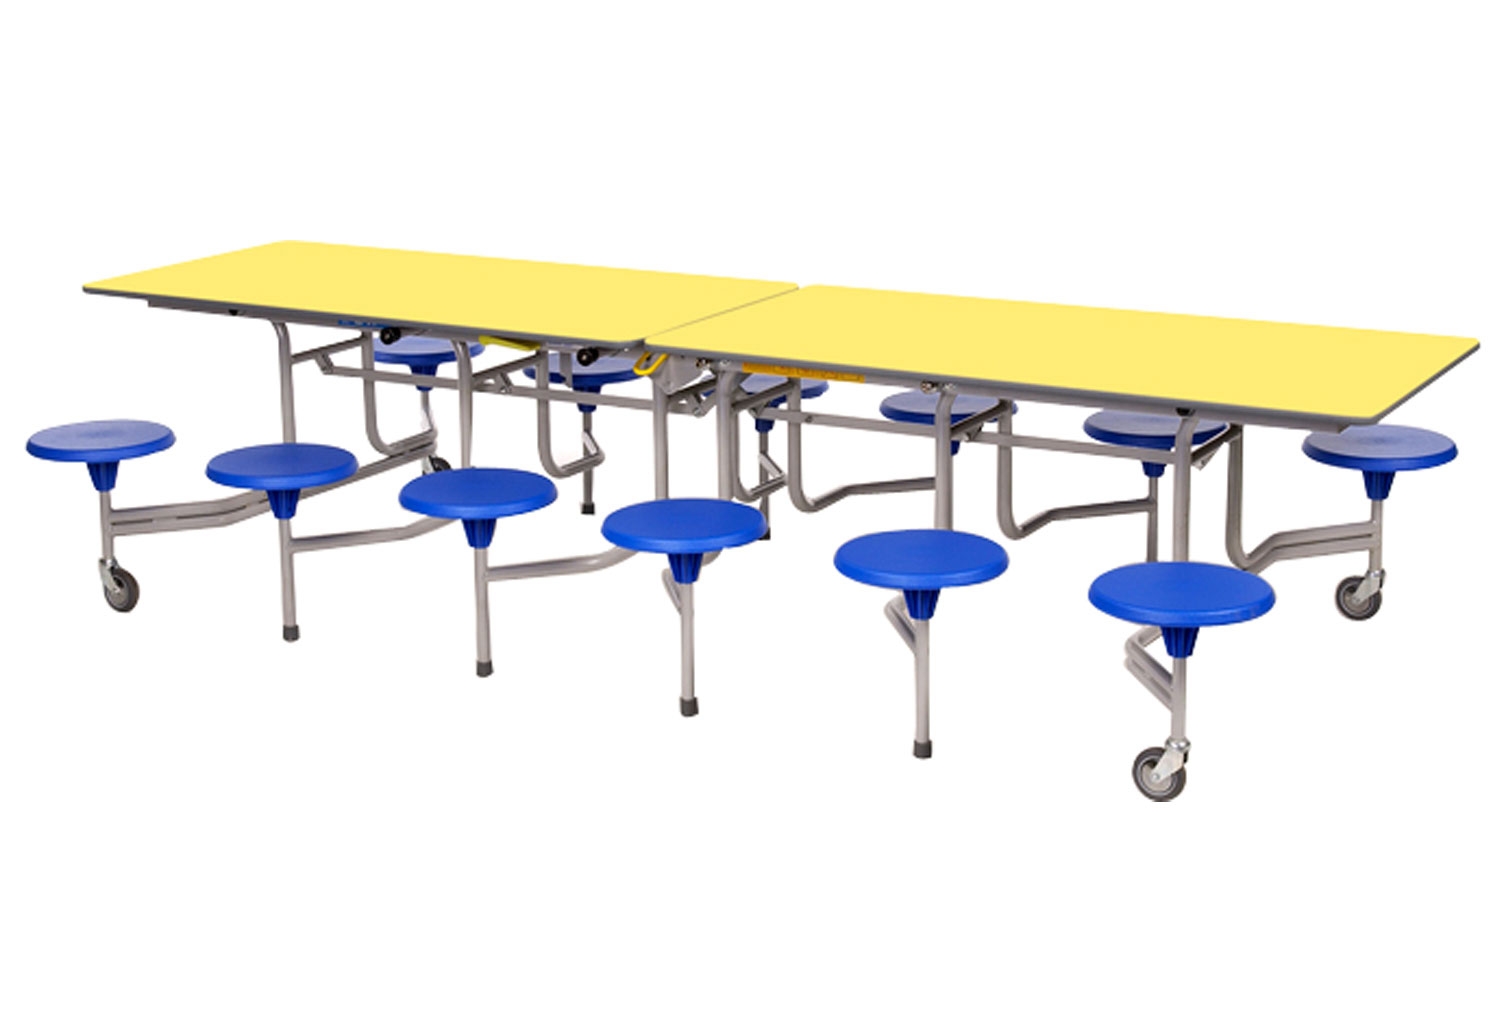 Sico Rectangular Table Seating Unit With 12 Seats, 74 (cm), Blue Silk Top, Yellow Seats